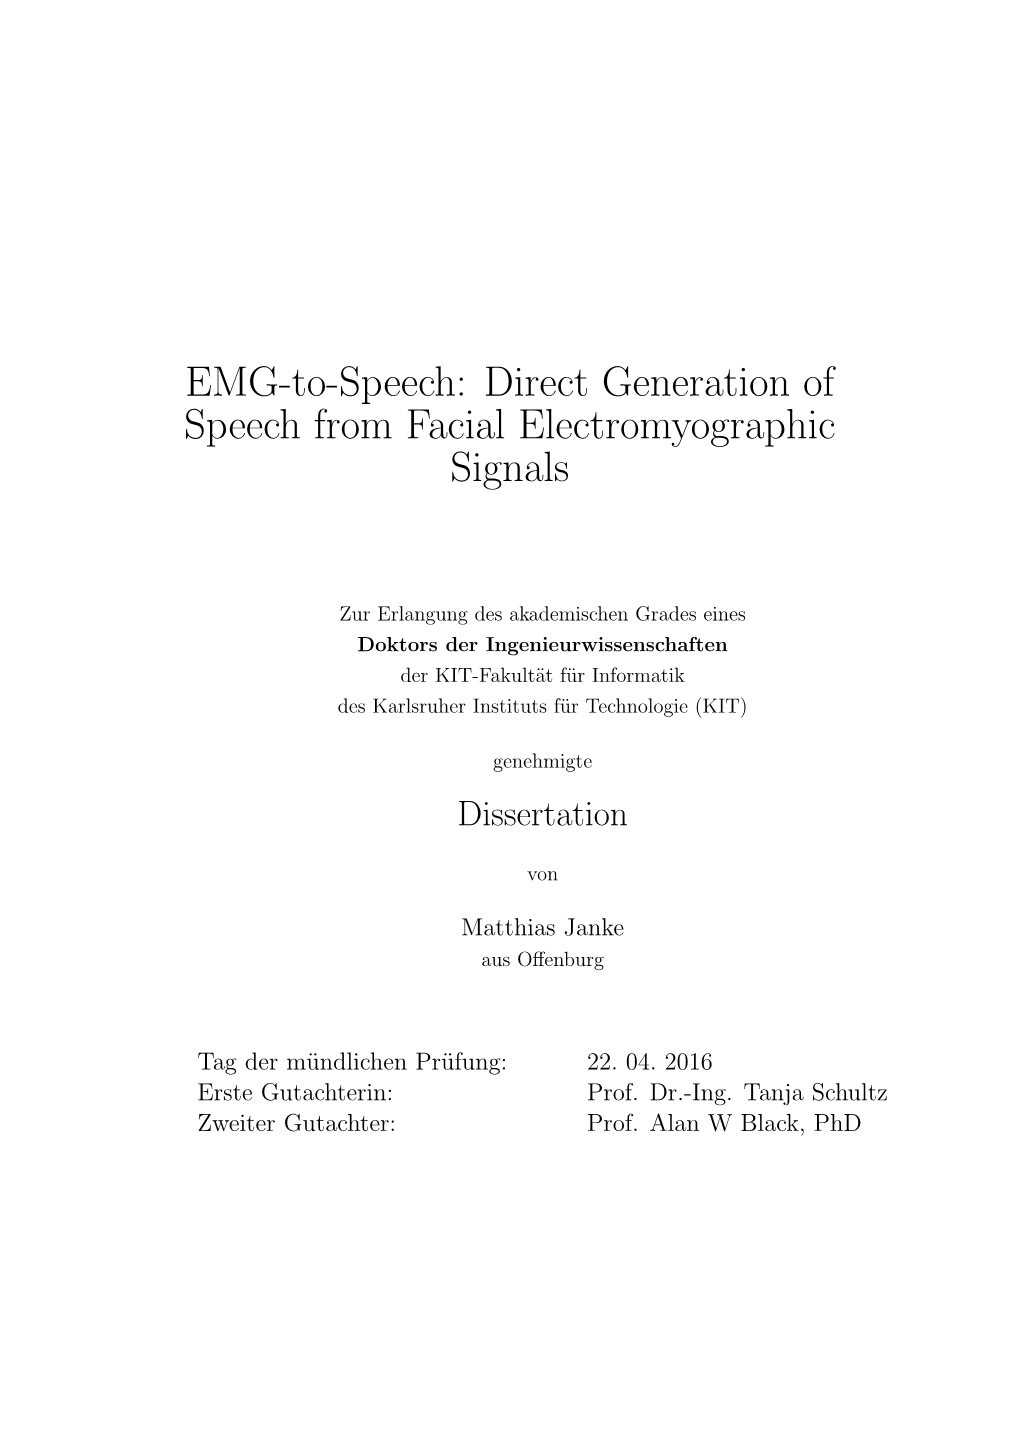 Direct Generation of Speech from Electromyographic Signals: EMG-To